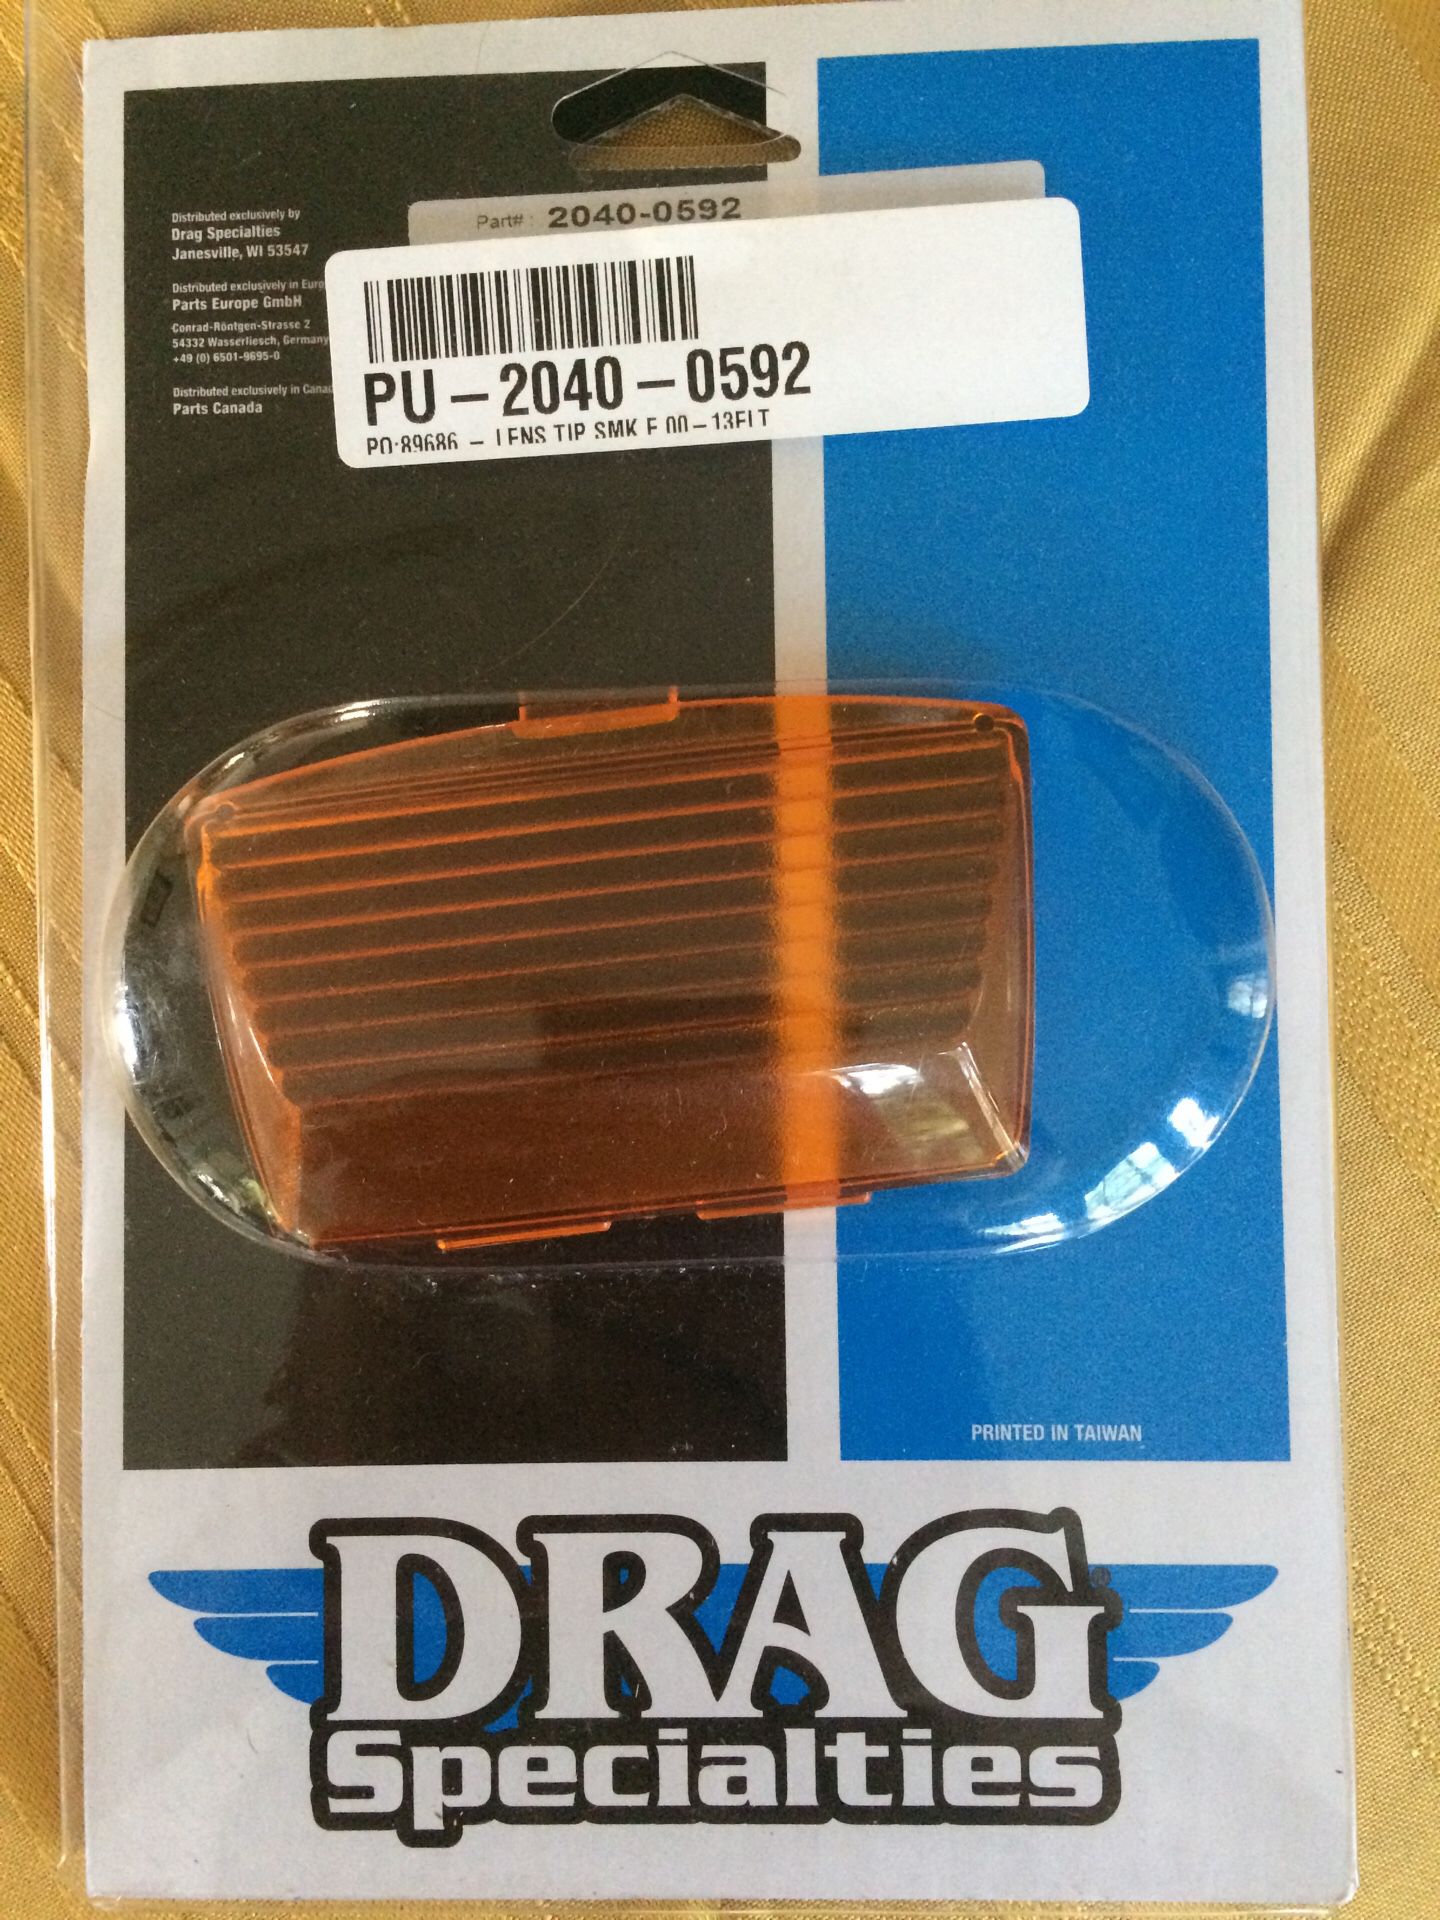 Harley Davidson motorcycle front fender lens cover new in packaging by drag specialties